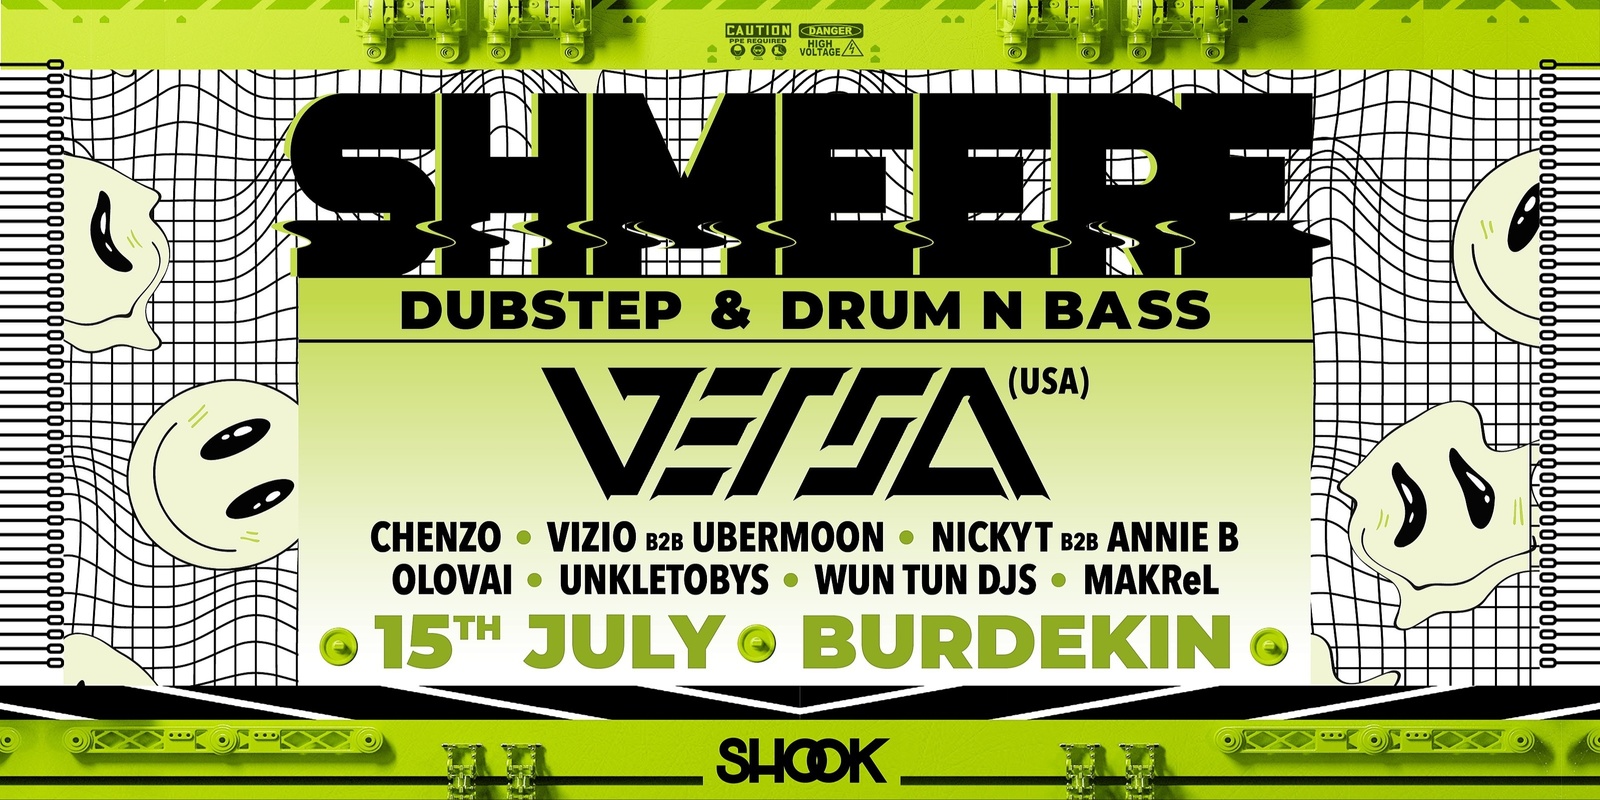 Banner image for SHMEERE 006  Dubstep & Drum n Bass ft. VERSA (USA)